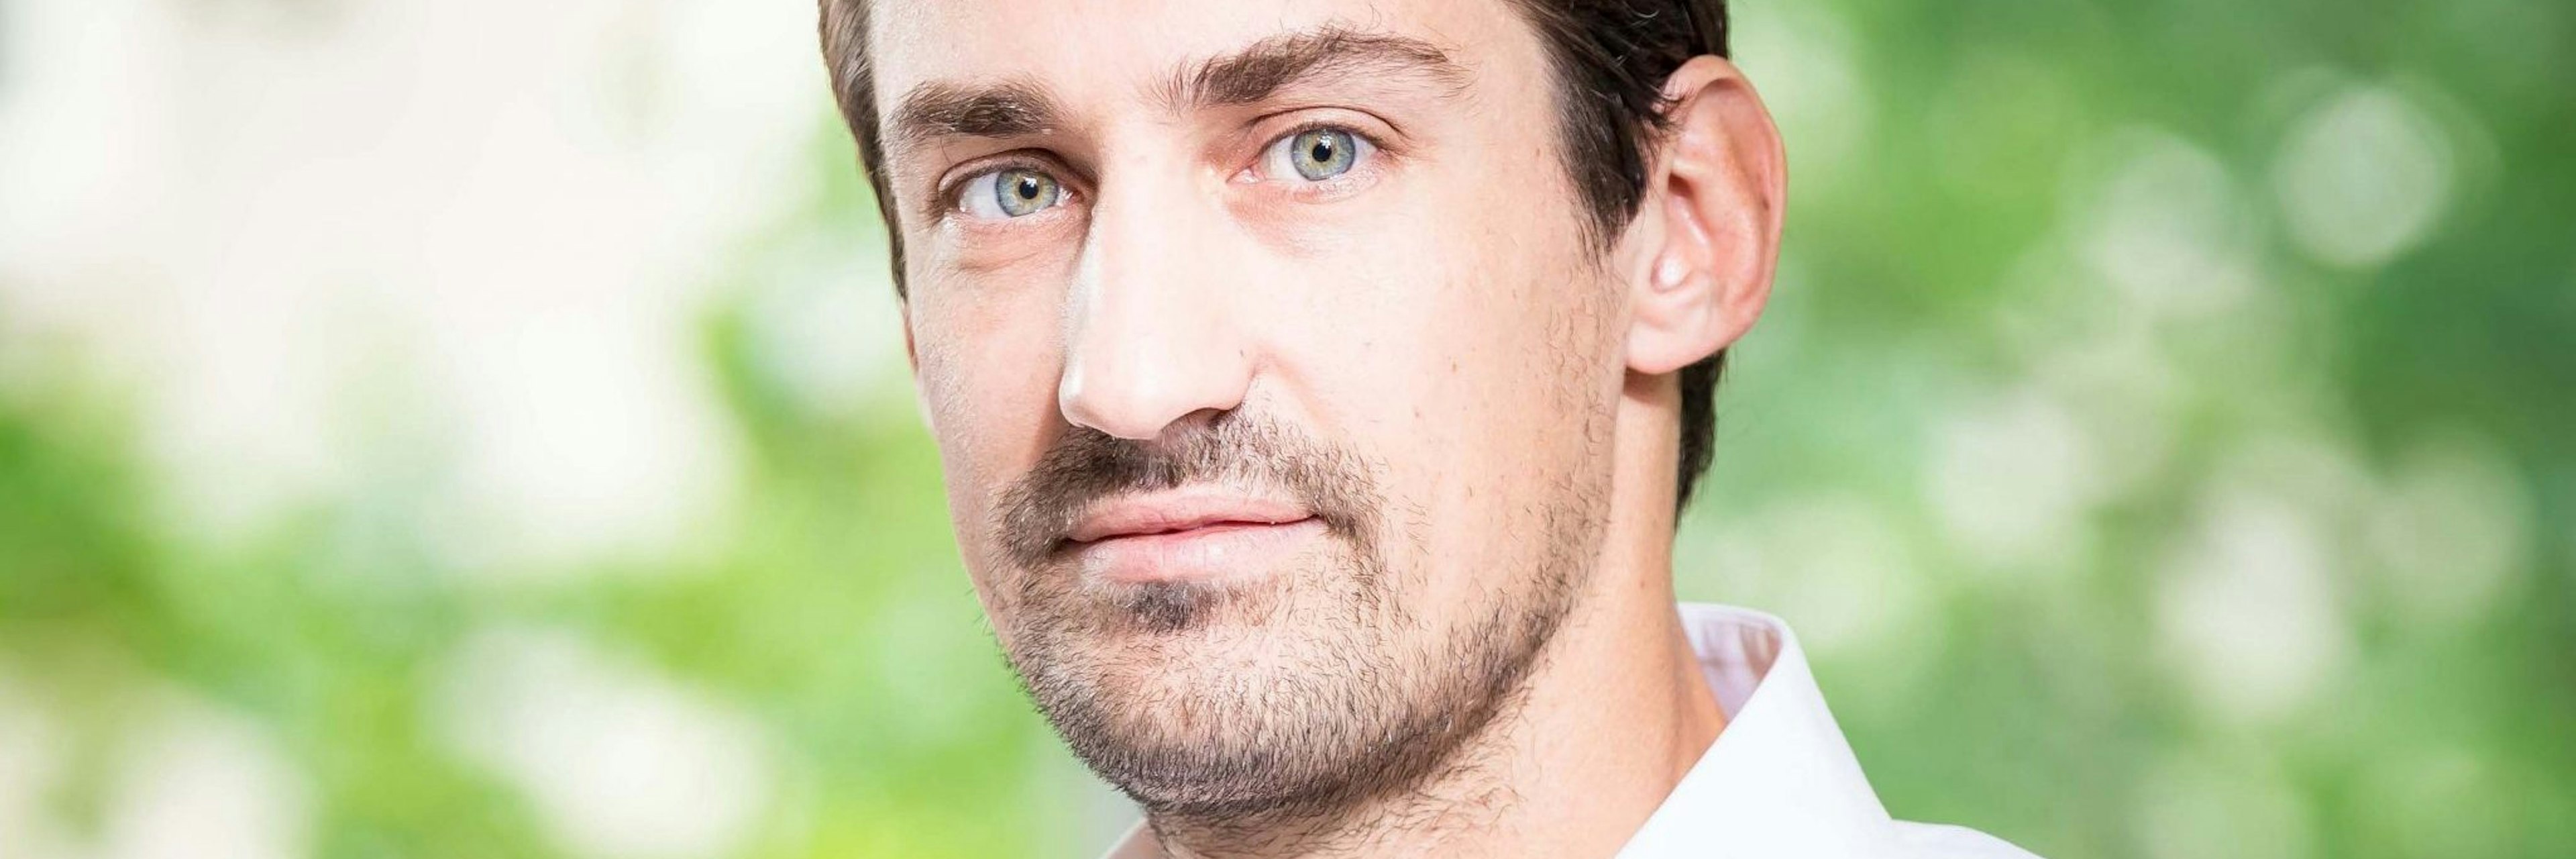 Photo of Guillaume Pousaz, founder and CEO of Checkout.com